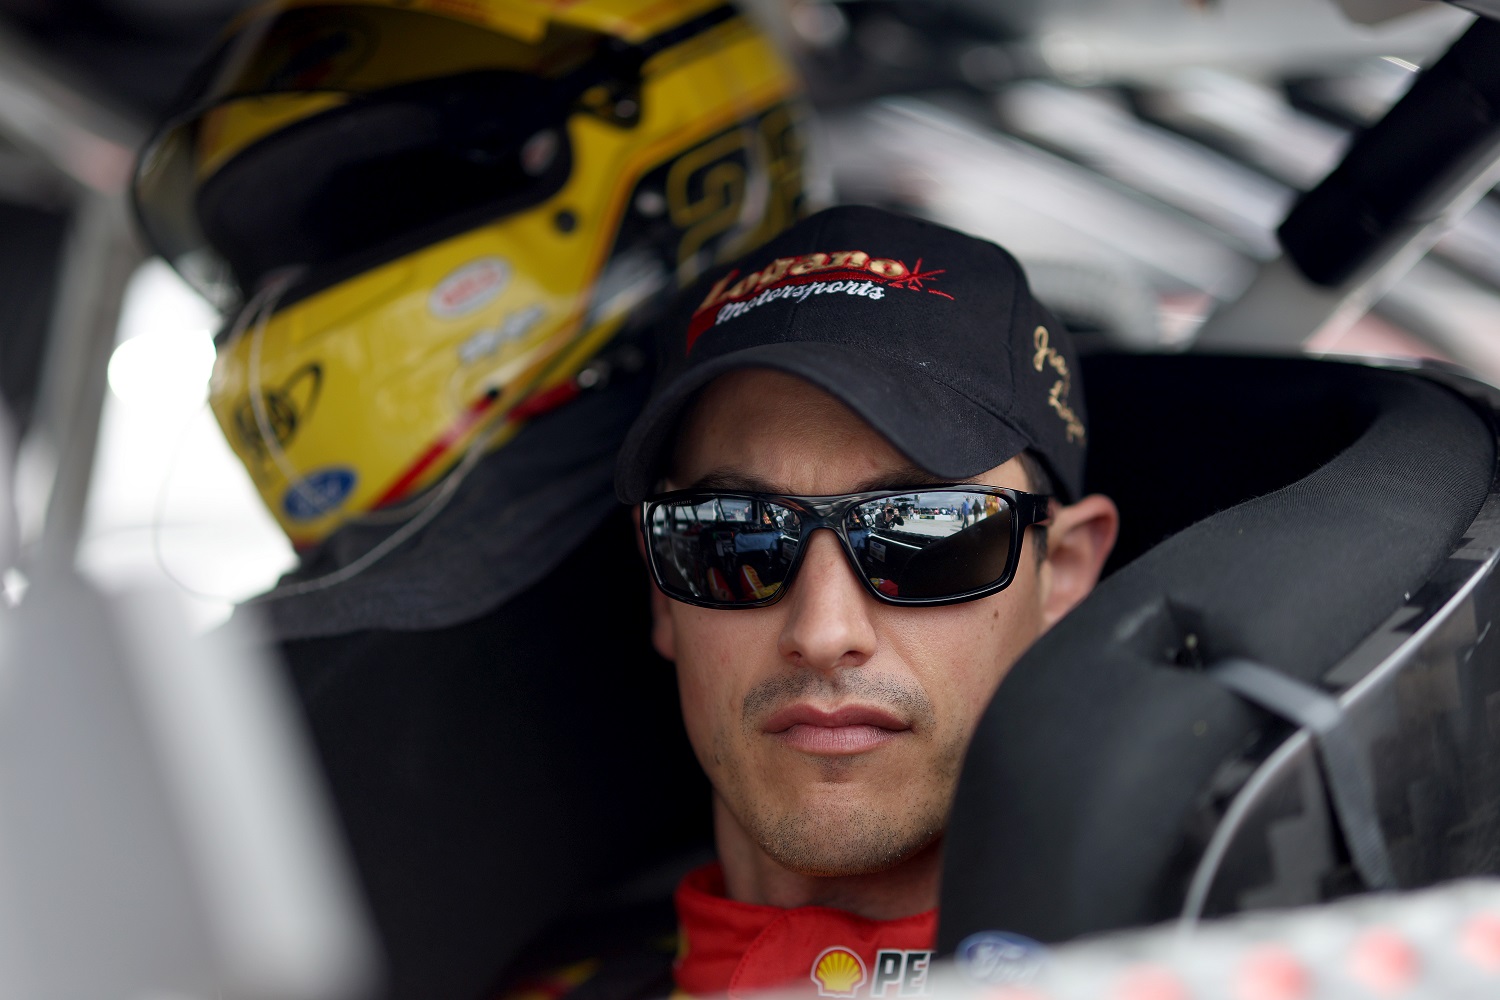 Joey Logano sits in his car prior to the NASCAR Cup Series Goodyear 400 at Darlington Raceway on May 8, 2022.